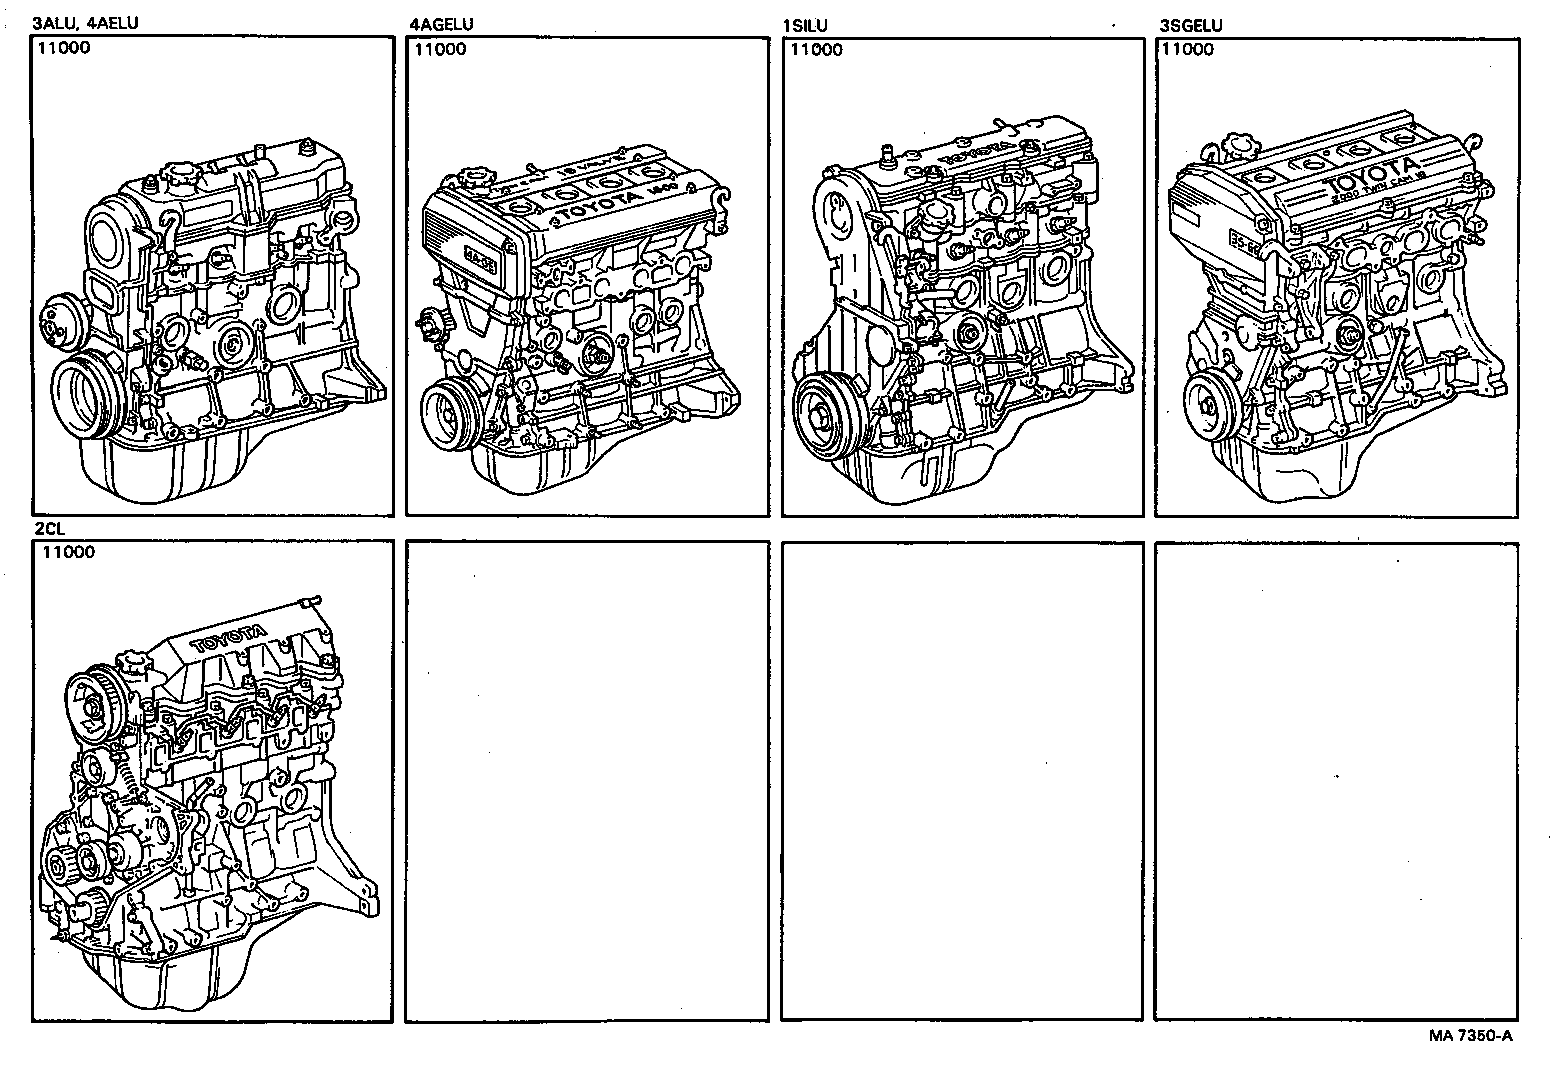  CARINA FF |  PARTIAL ENGINE ASSEMBLY